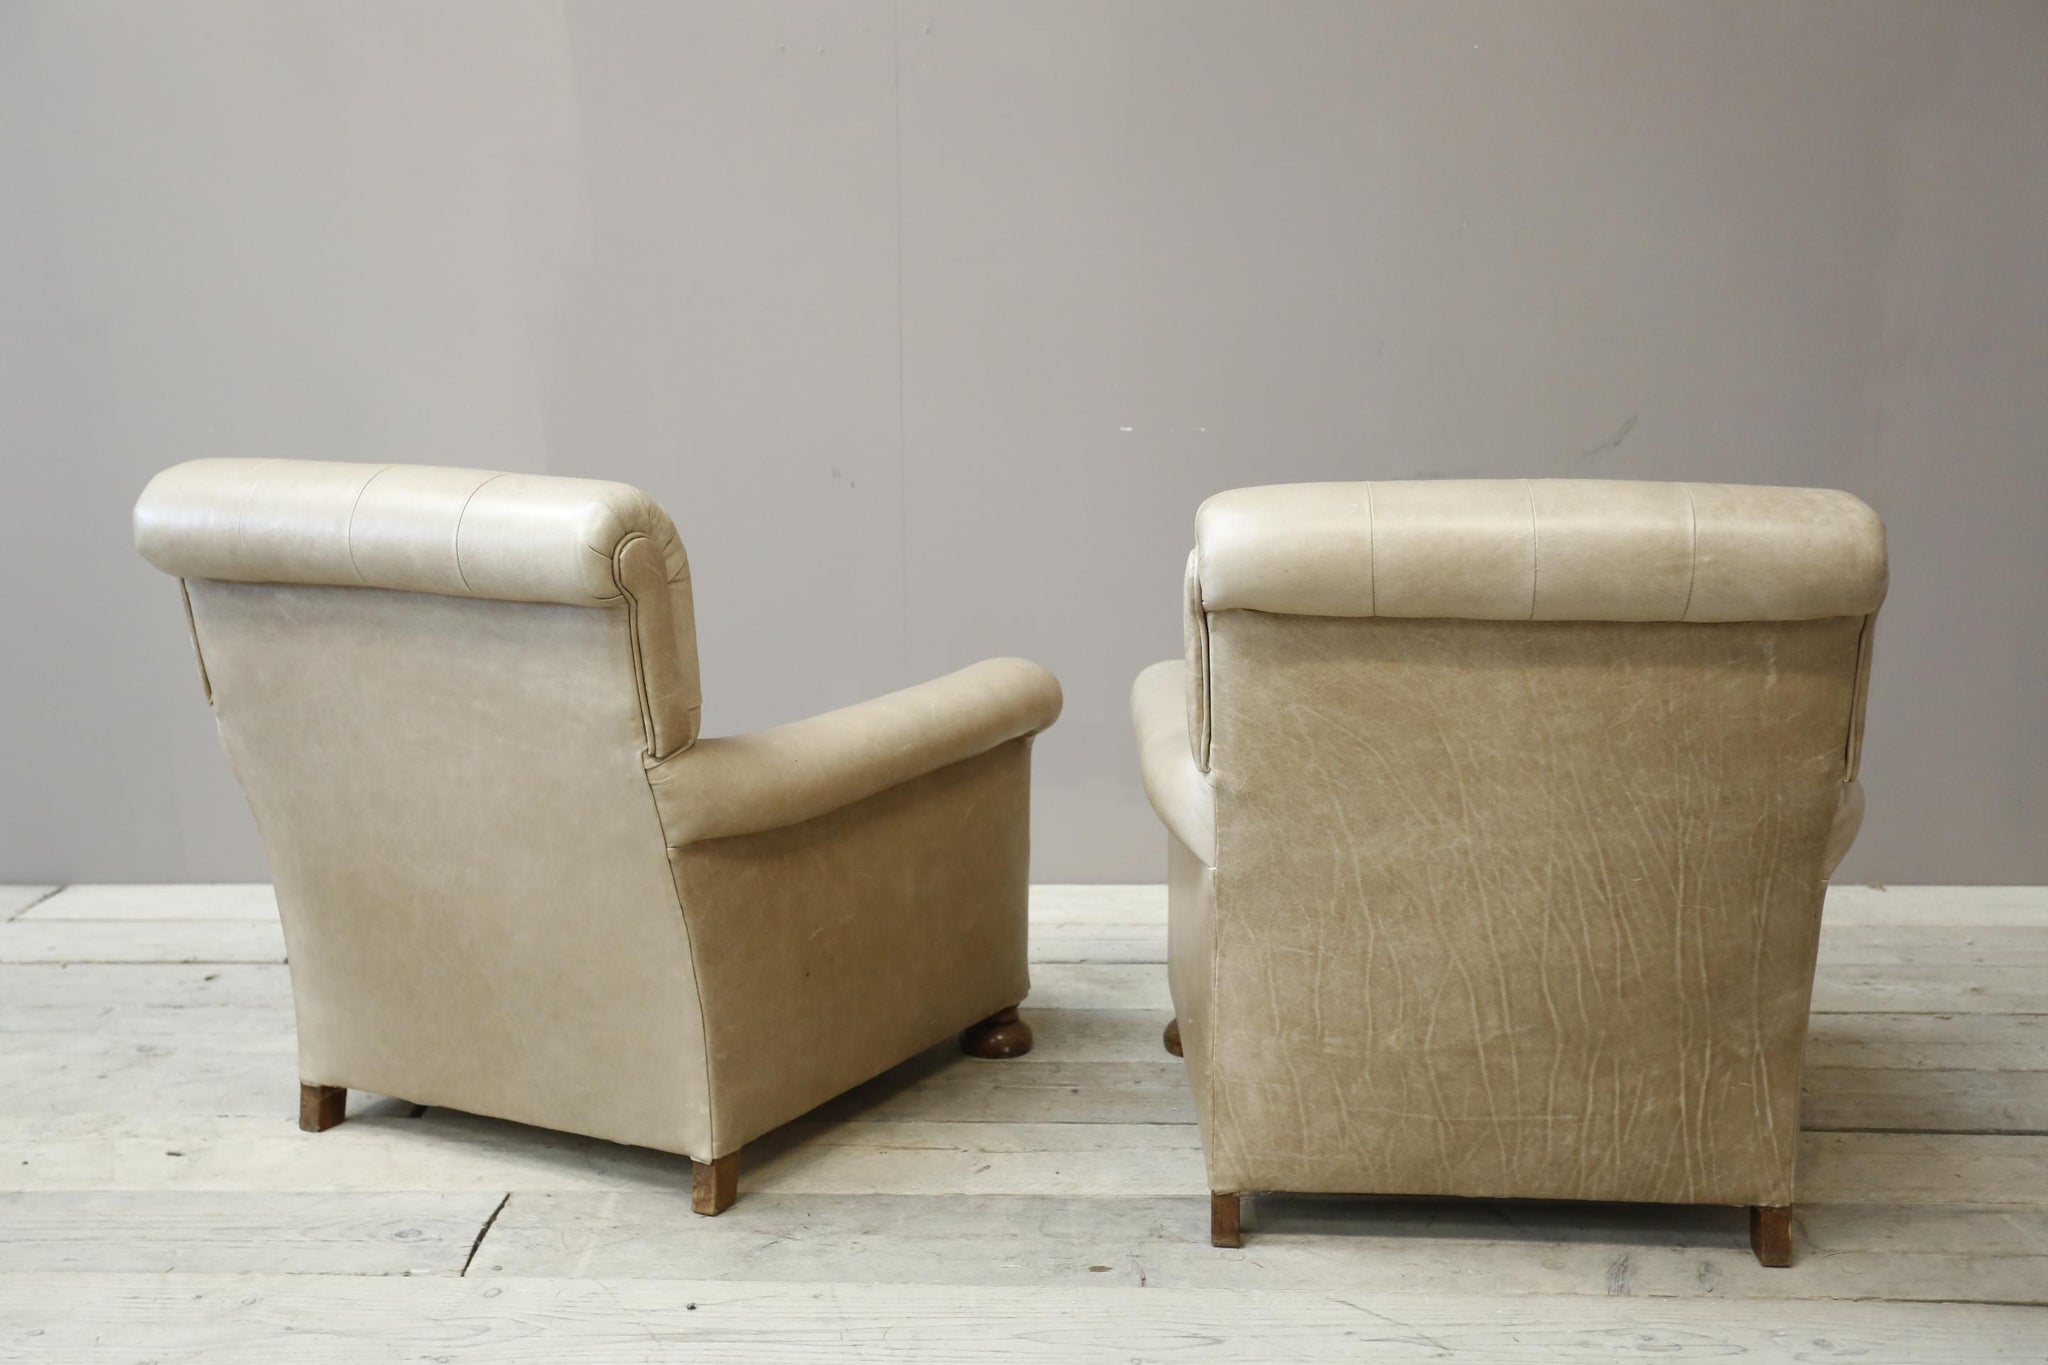 Pair of 1920's English deep seated armchairs